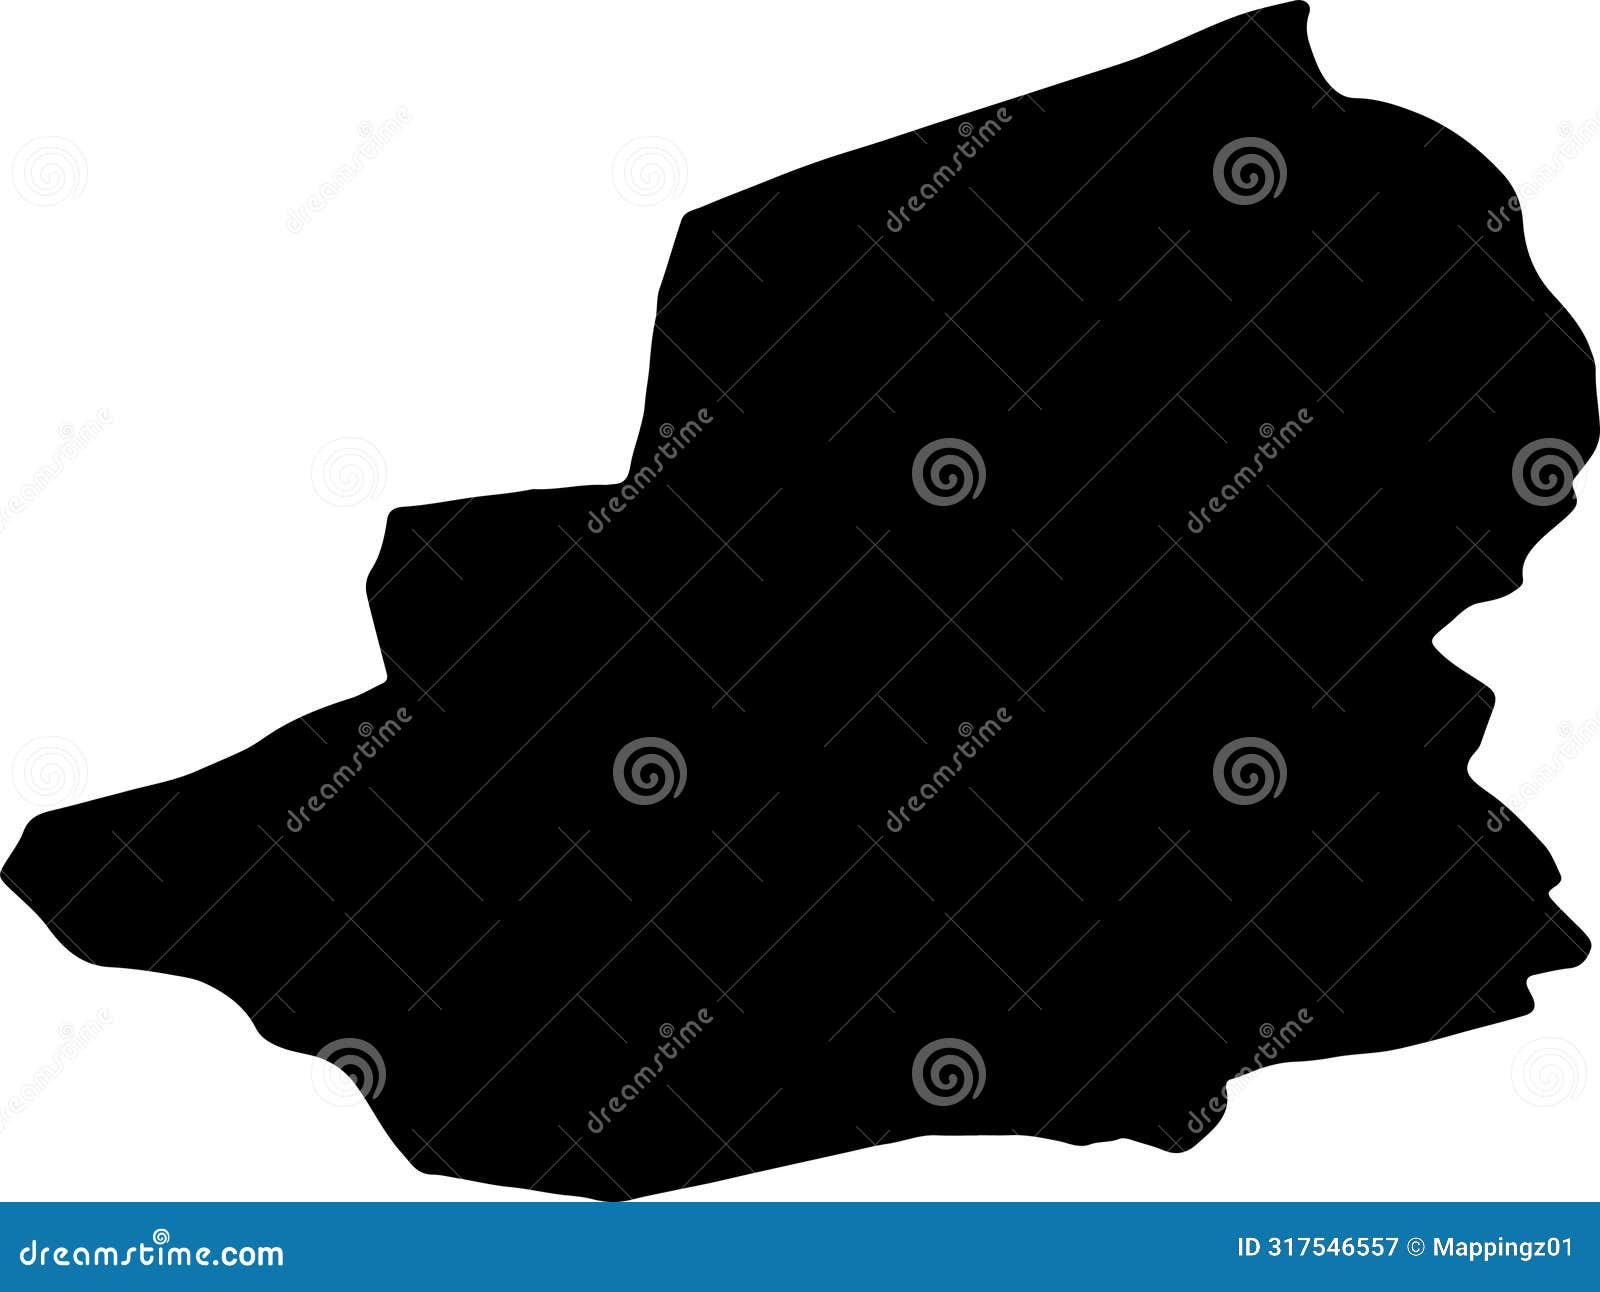 kars turkey silhouette map with transparent background